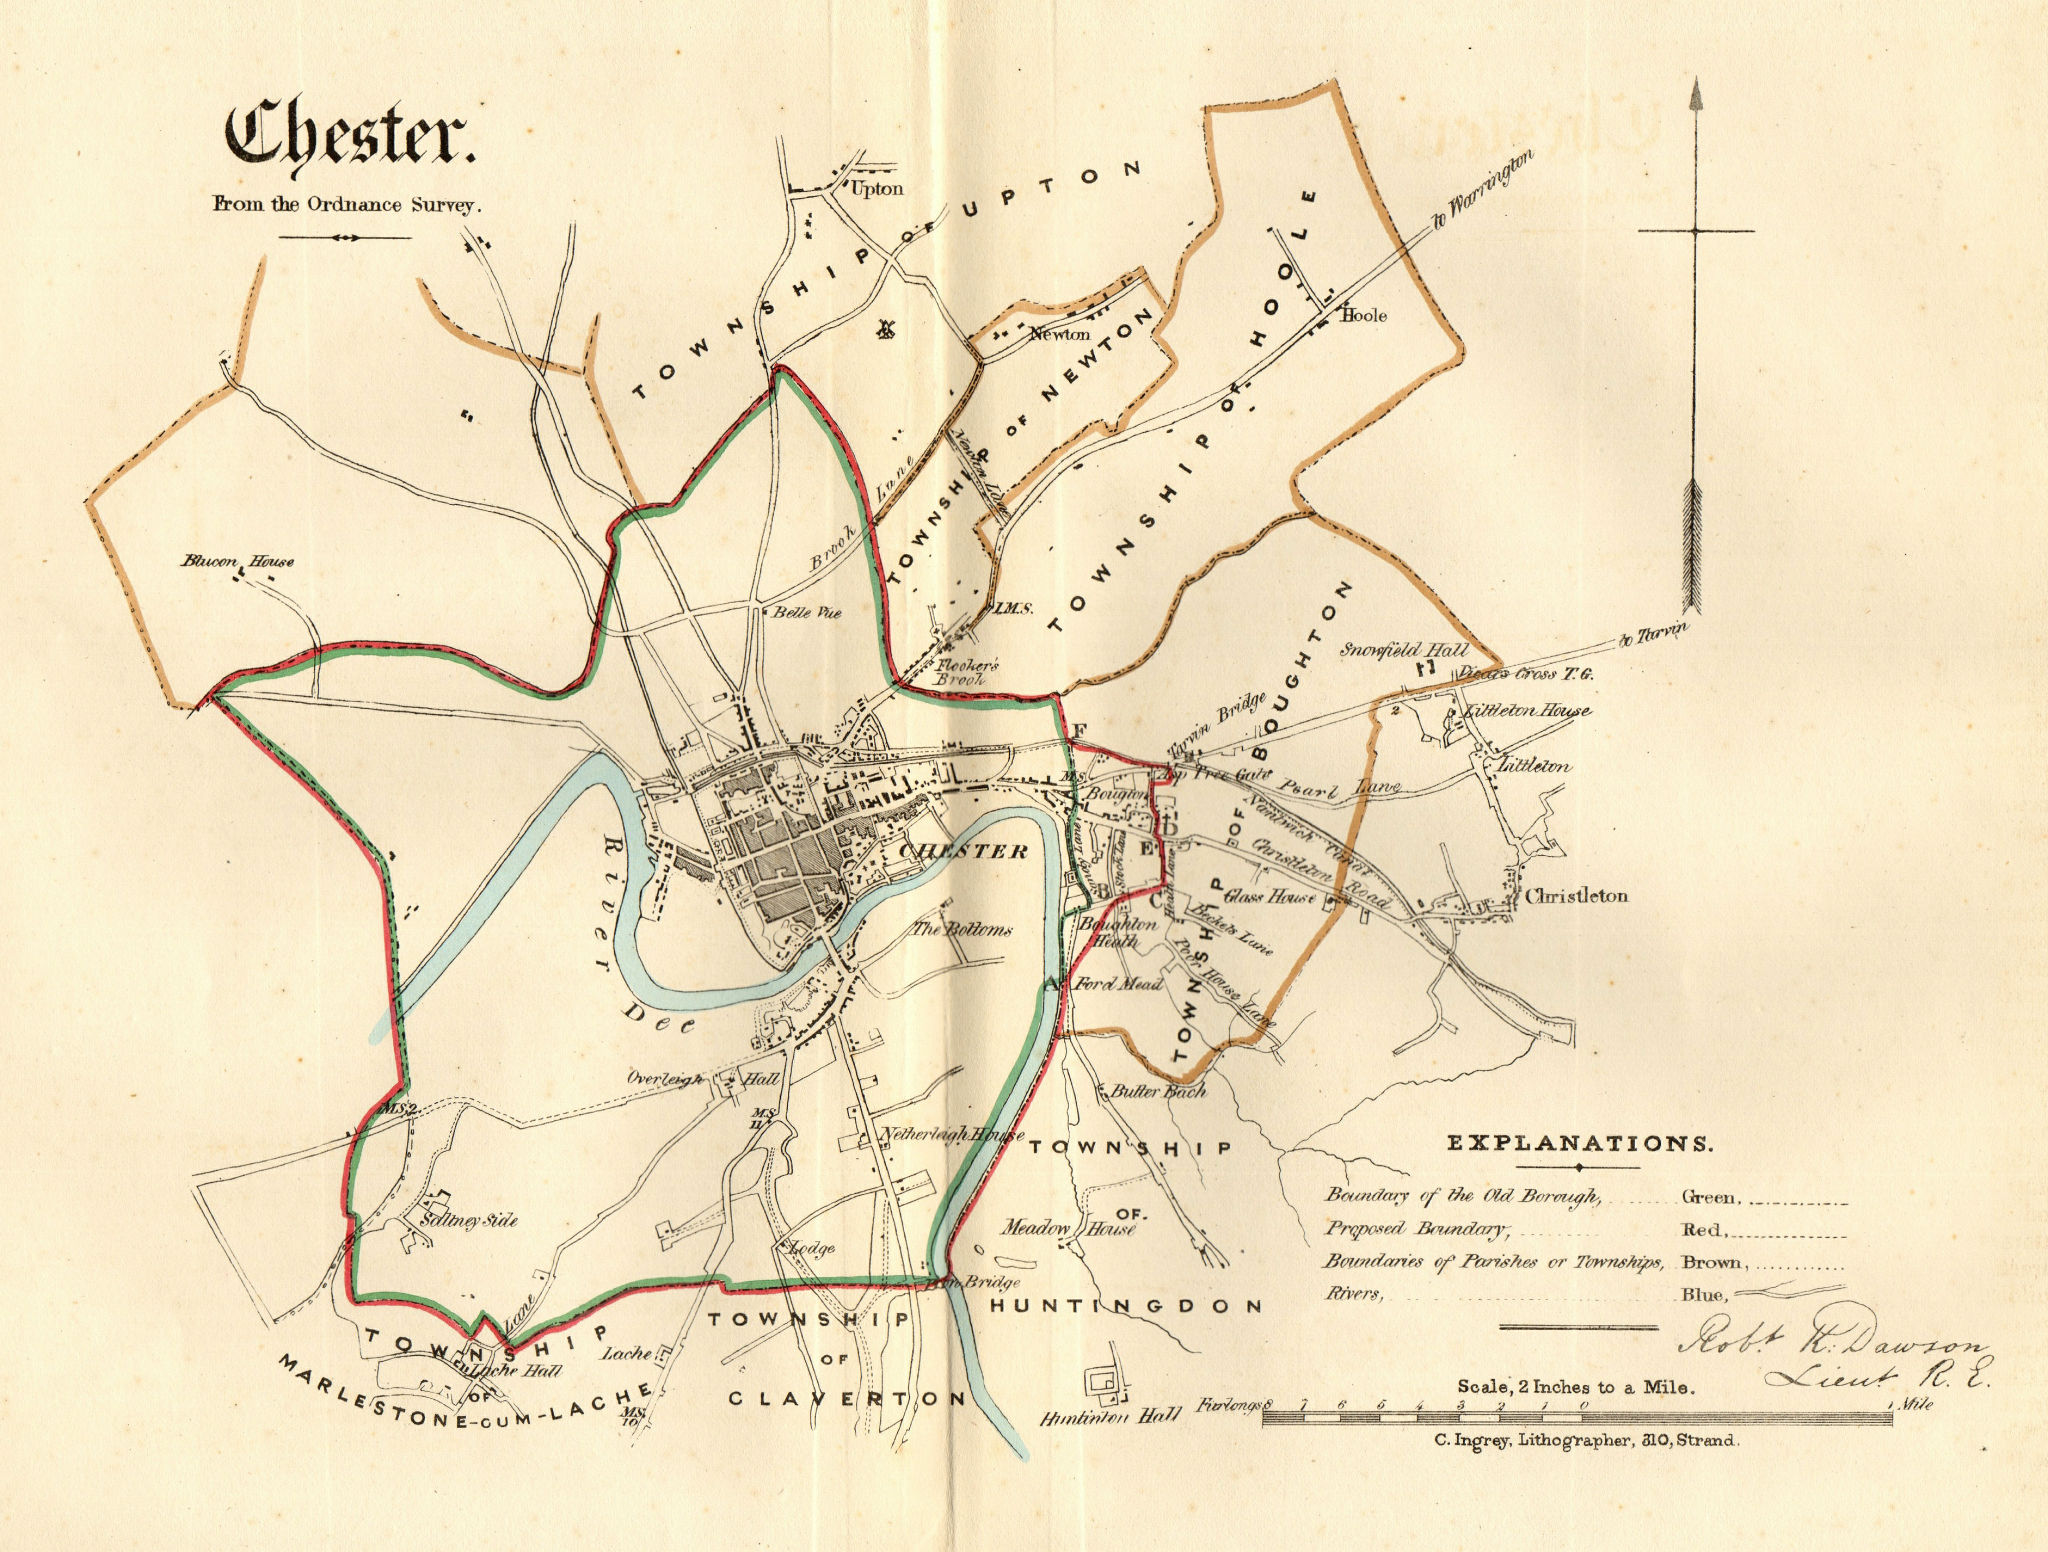 Associate Product CHESTER borough/town/city plan. REFORM ACT. Cheshire. DAWSON 1832 old map